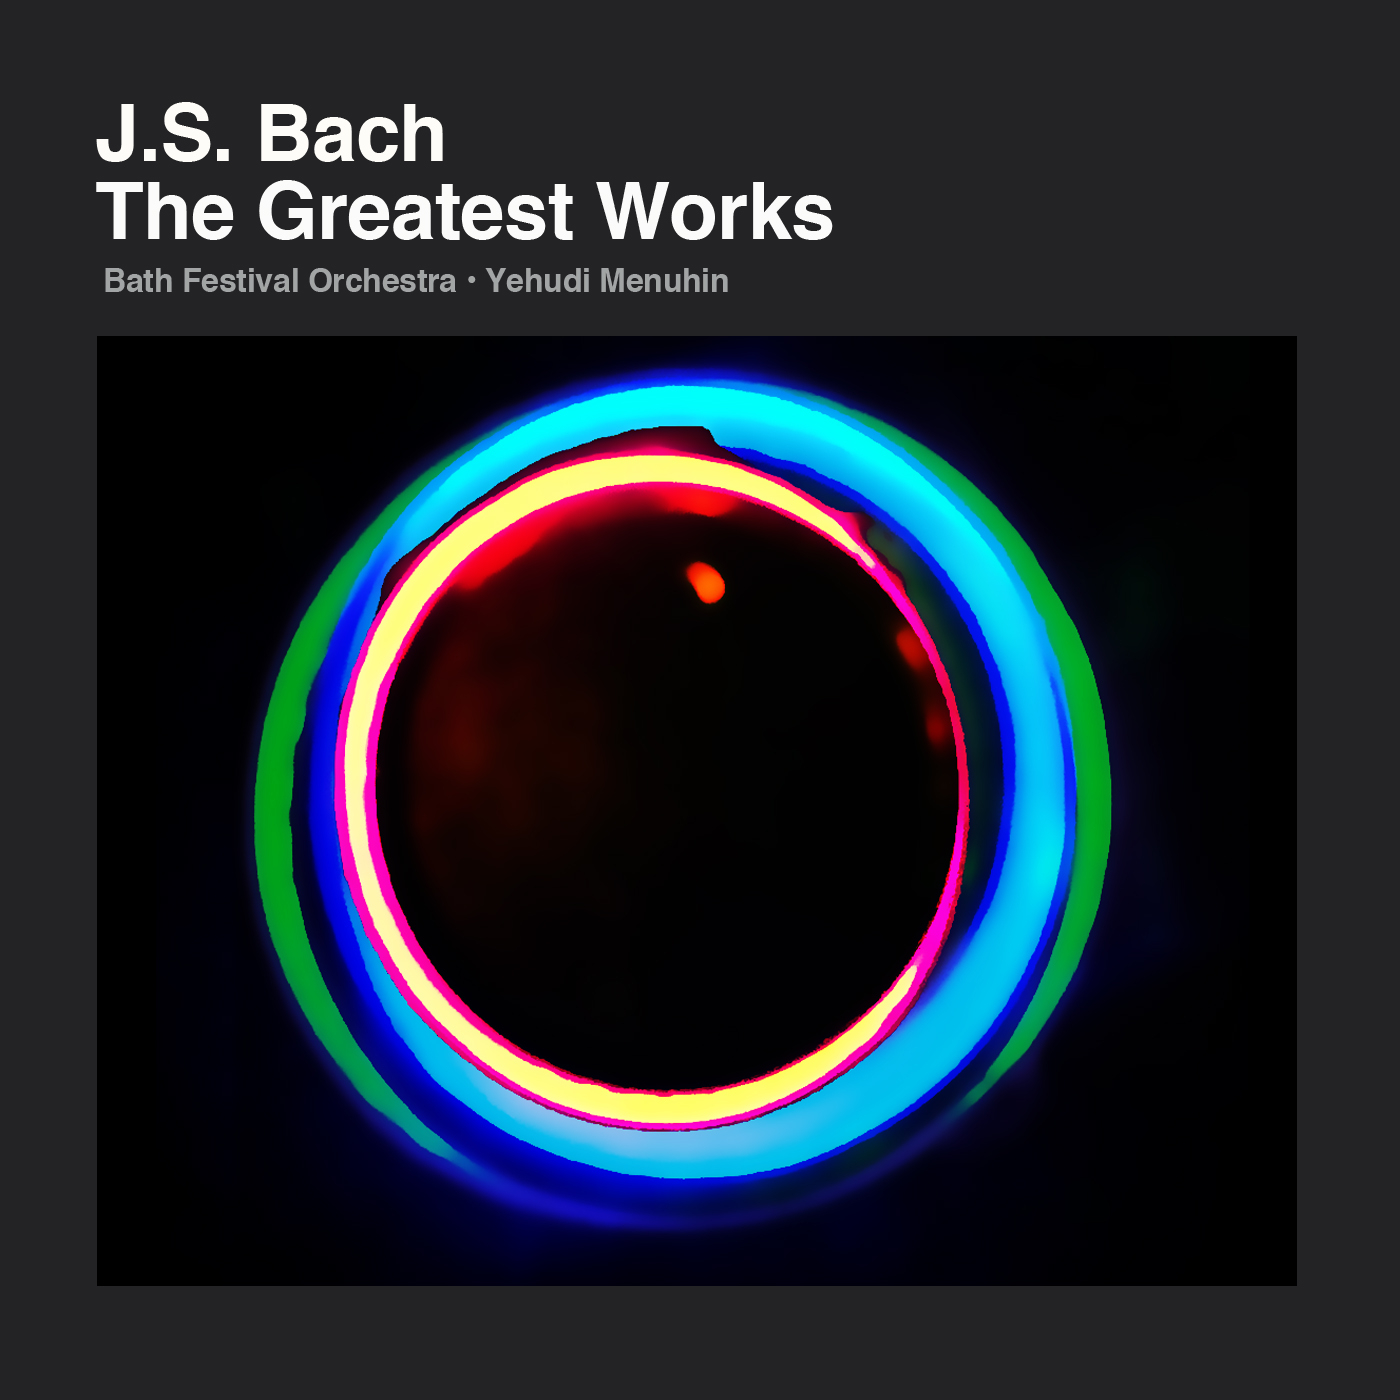 J. S. Bach: The Greatest Works